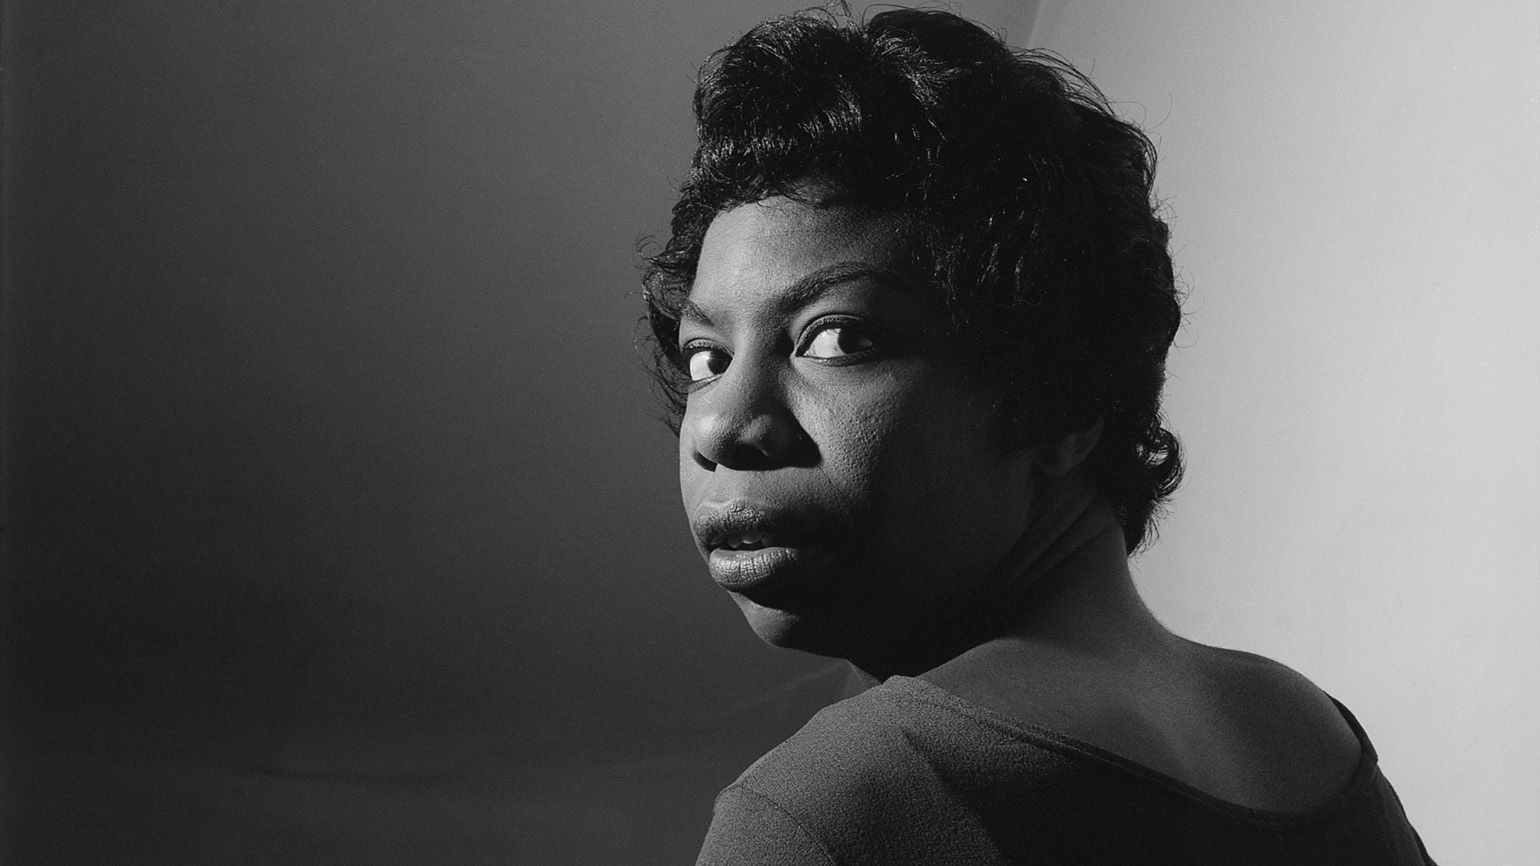 Nina Simone looks over her shoulder as an inspiring person for Black History Month